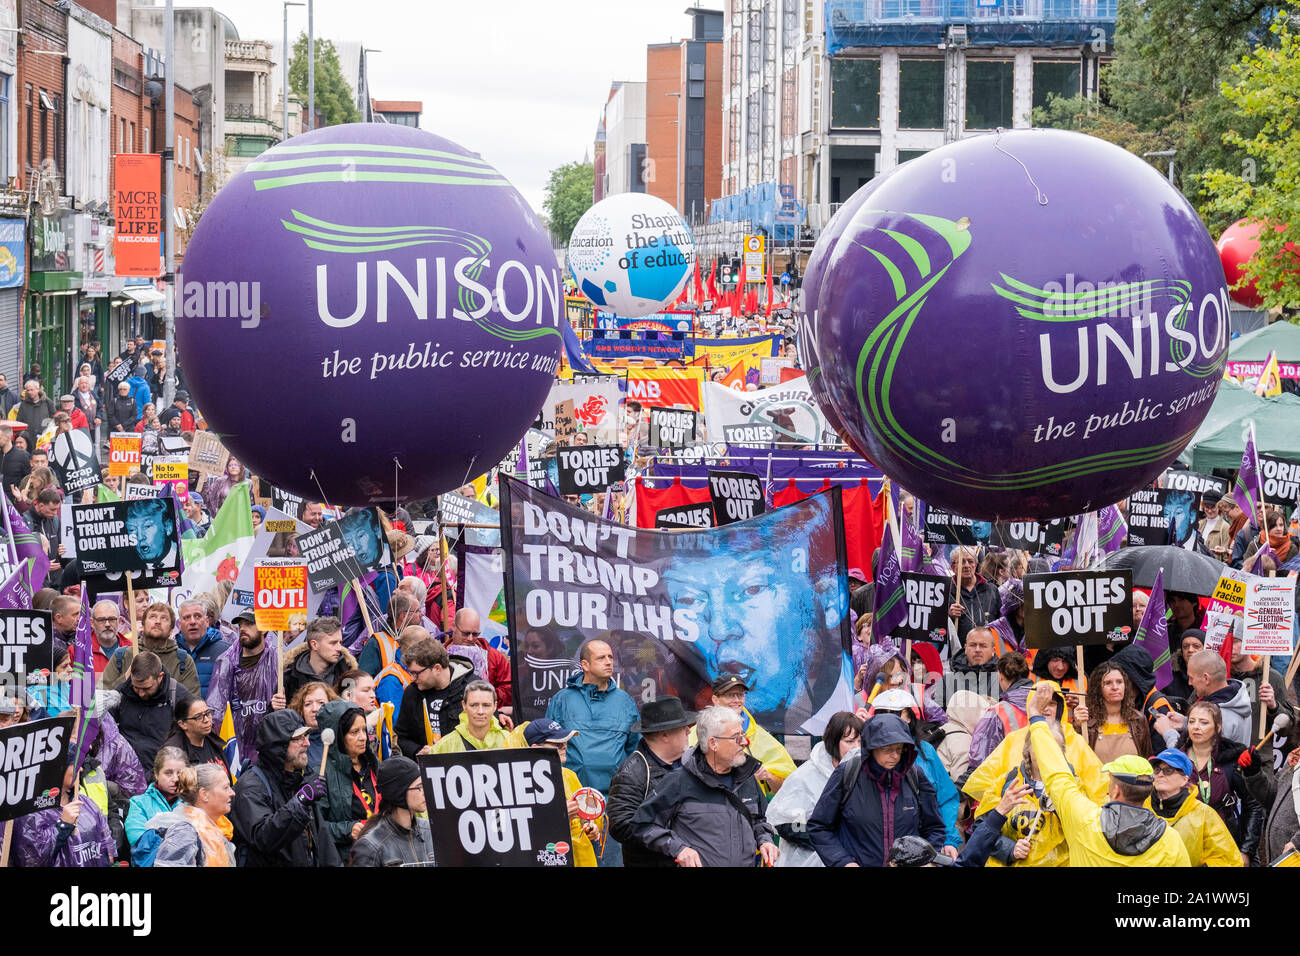 Manchester, UK. 29th September, 2019. Thousands of people filled the streets of Manchester city centre, in the north west of England, to protest against the Conservative Party Conference which is being held in the city at the Manchester Central Convention Complex. Credit: Christopher Middleton/Alamy Live News Stock Photo